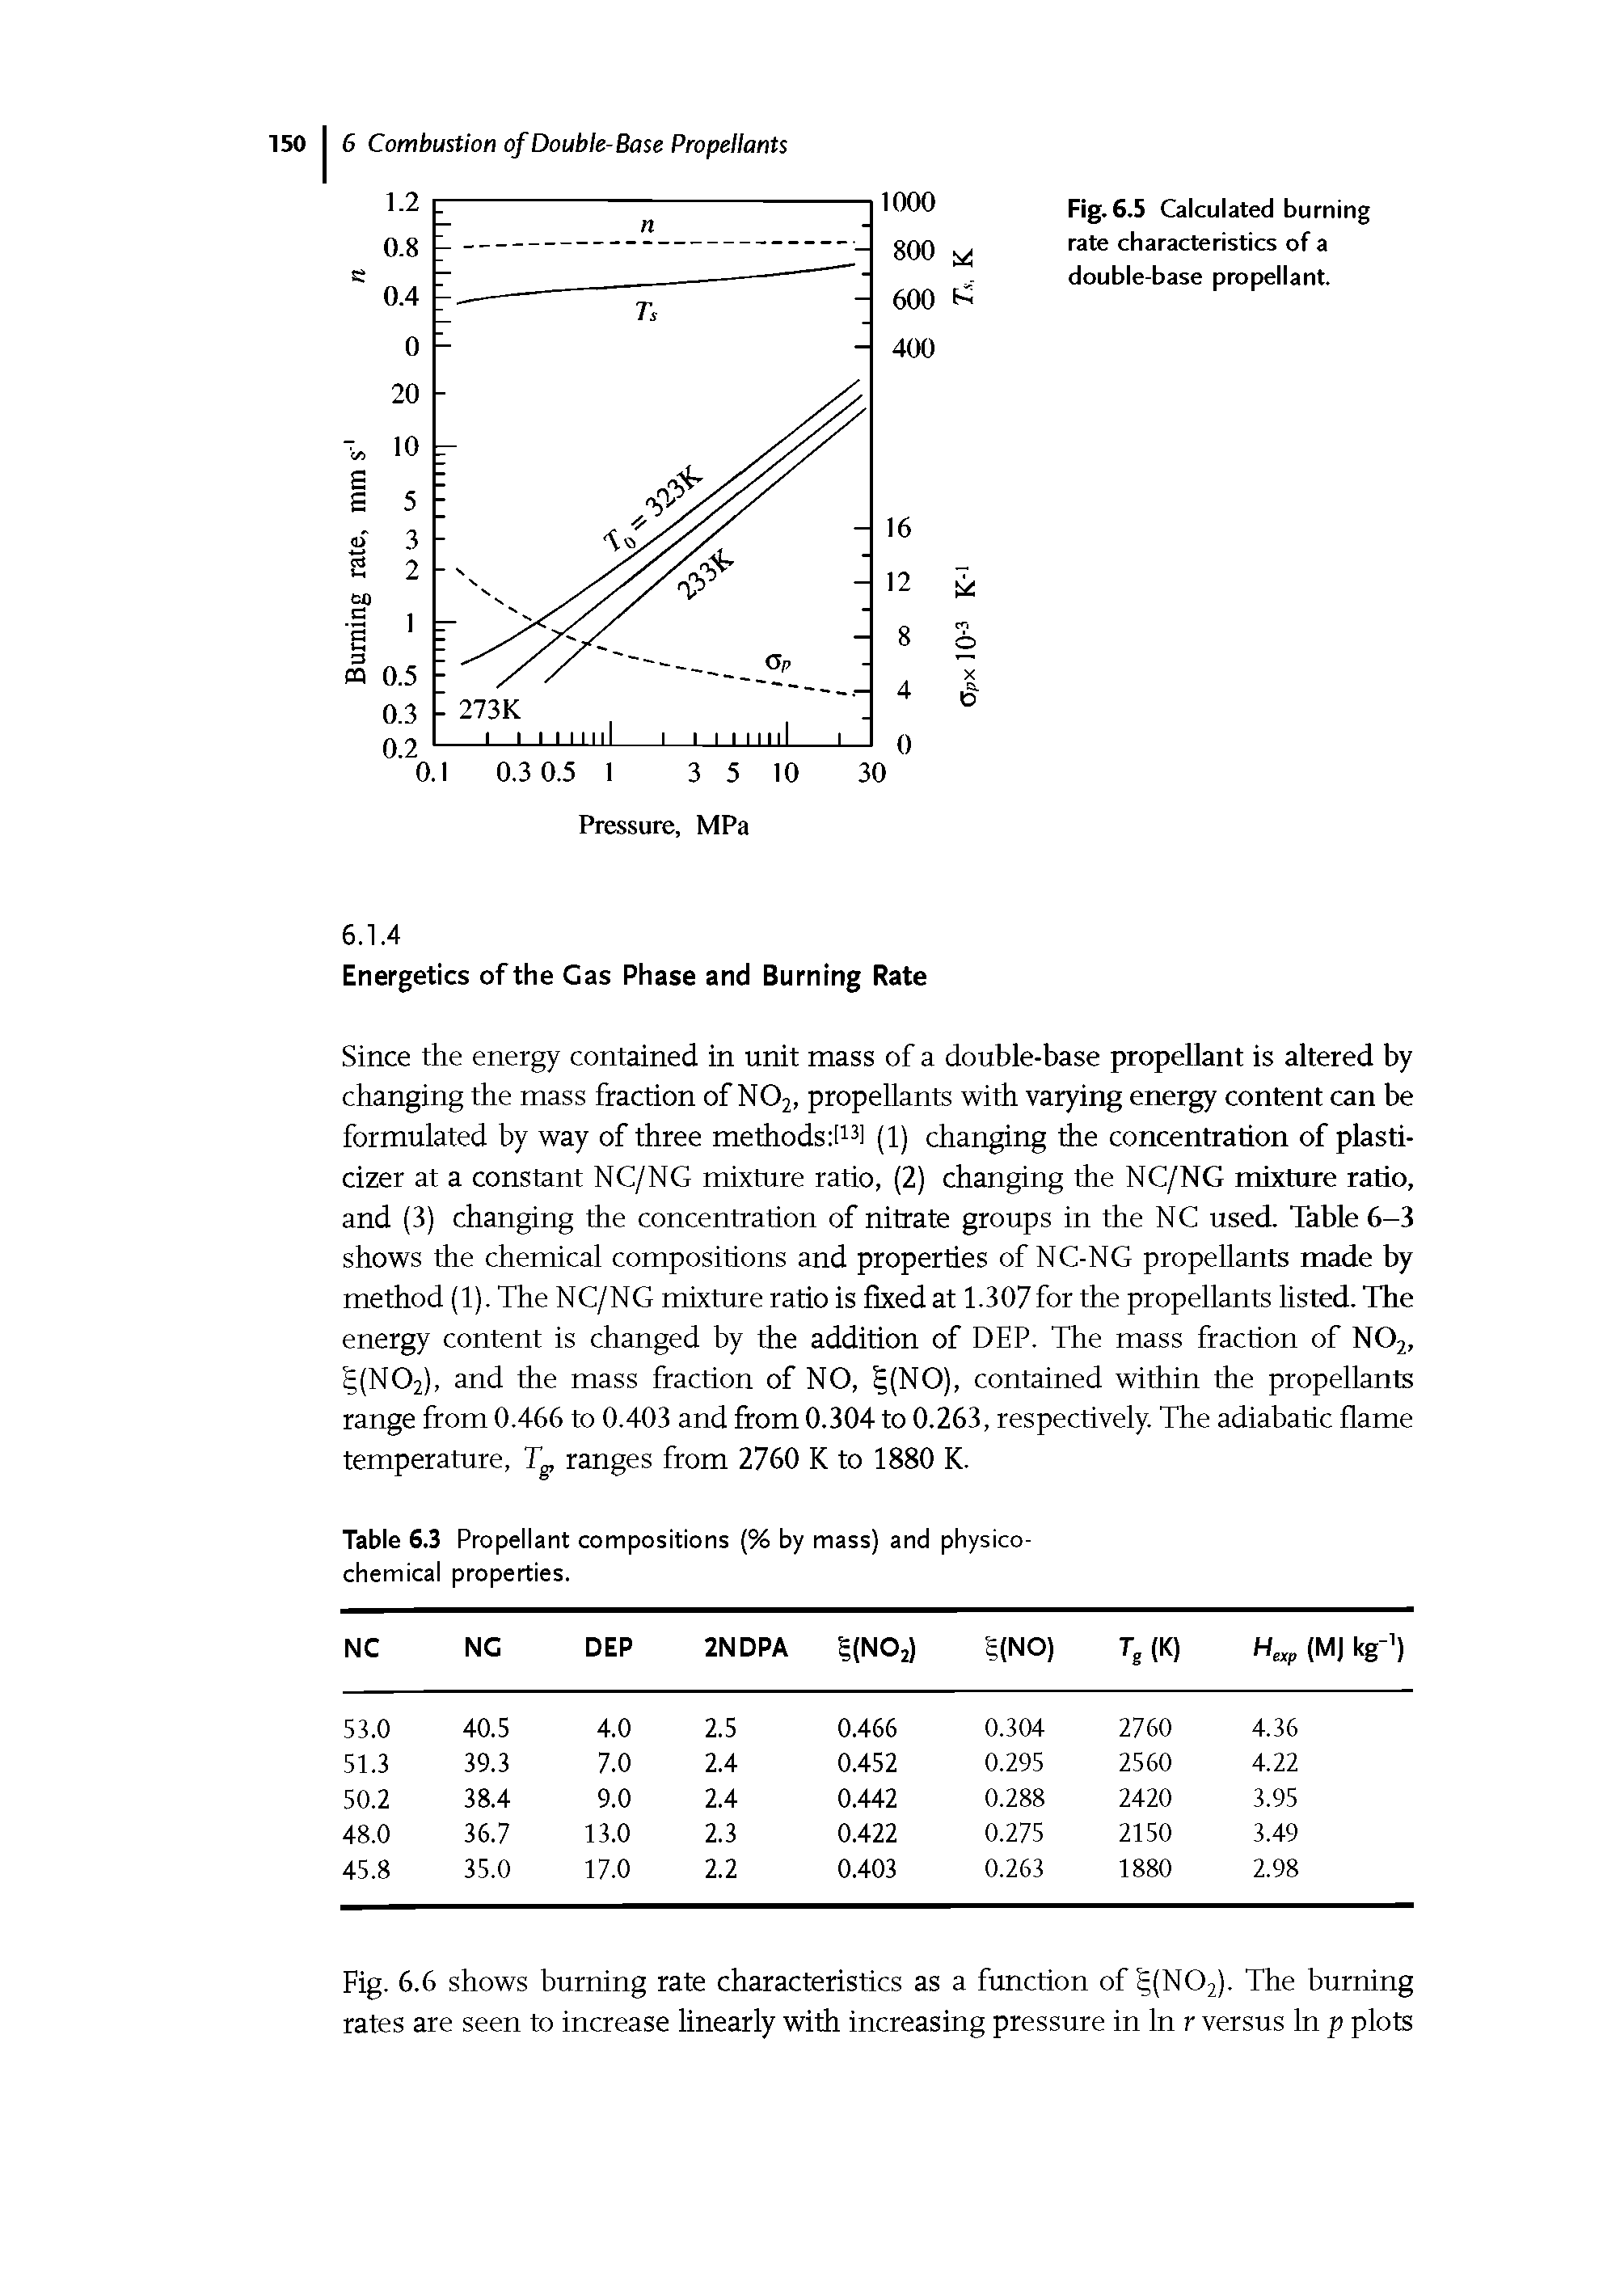 Fig. 6.5 Calculated burning rate characteristics of a double-base propellant.